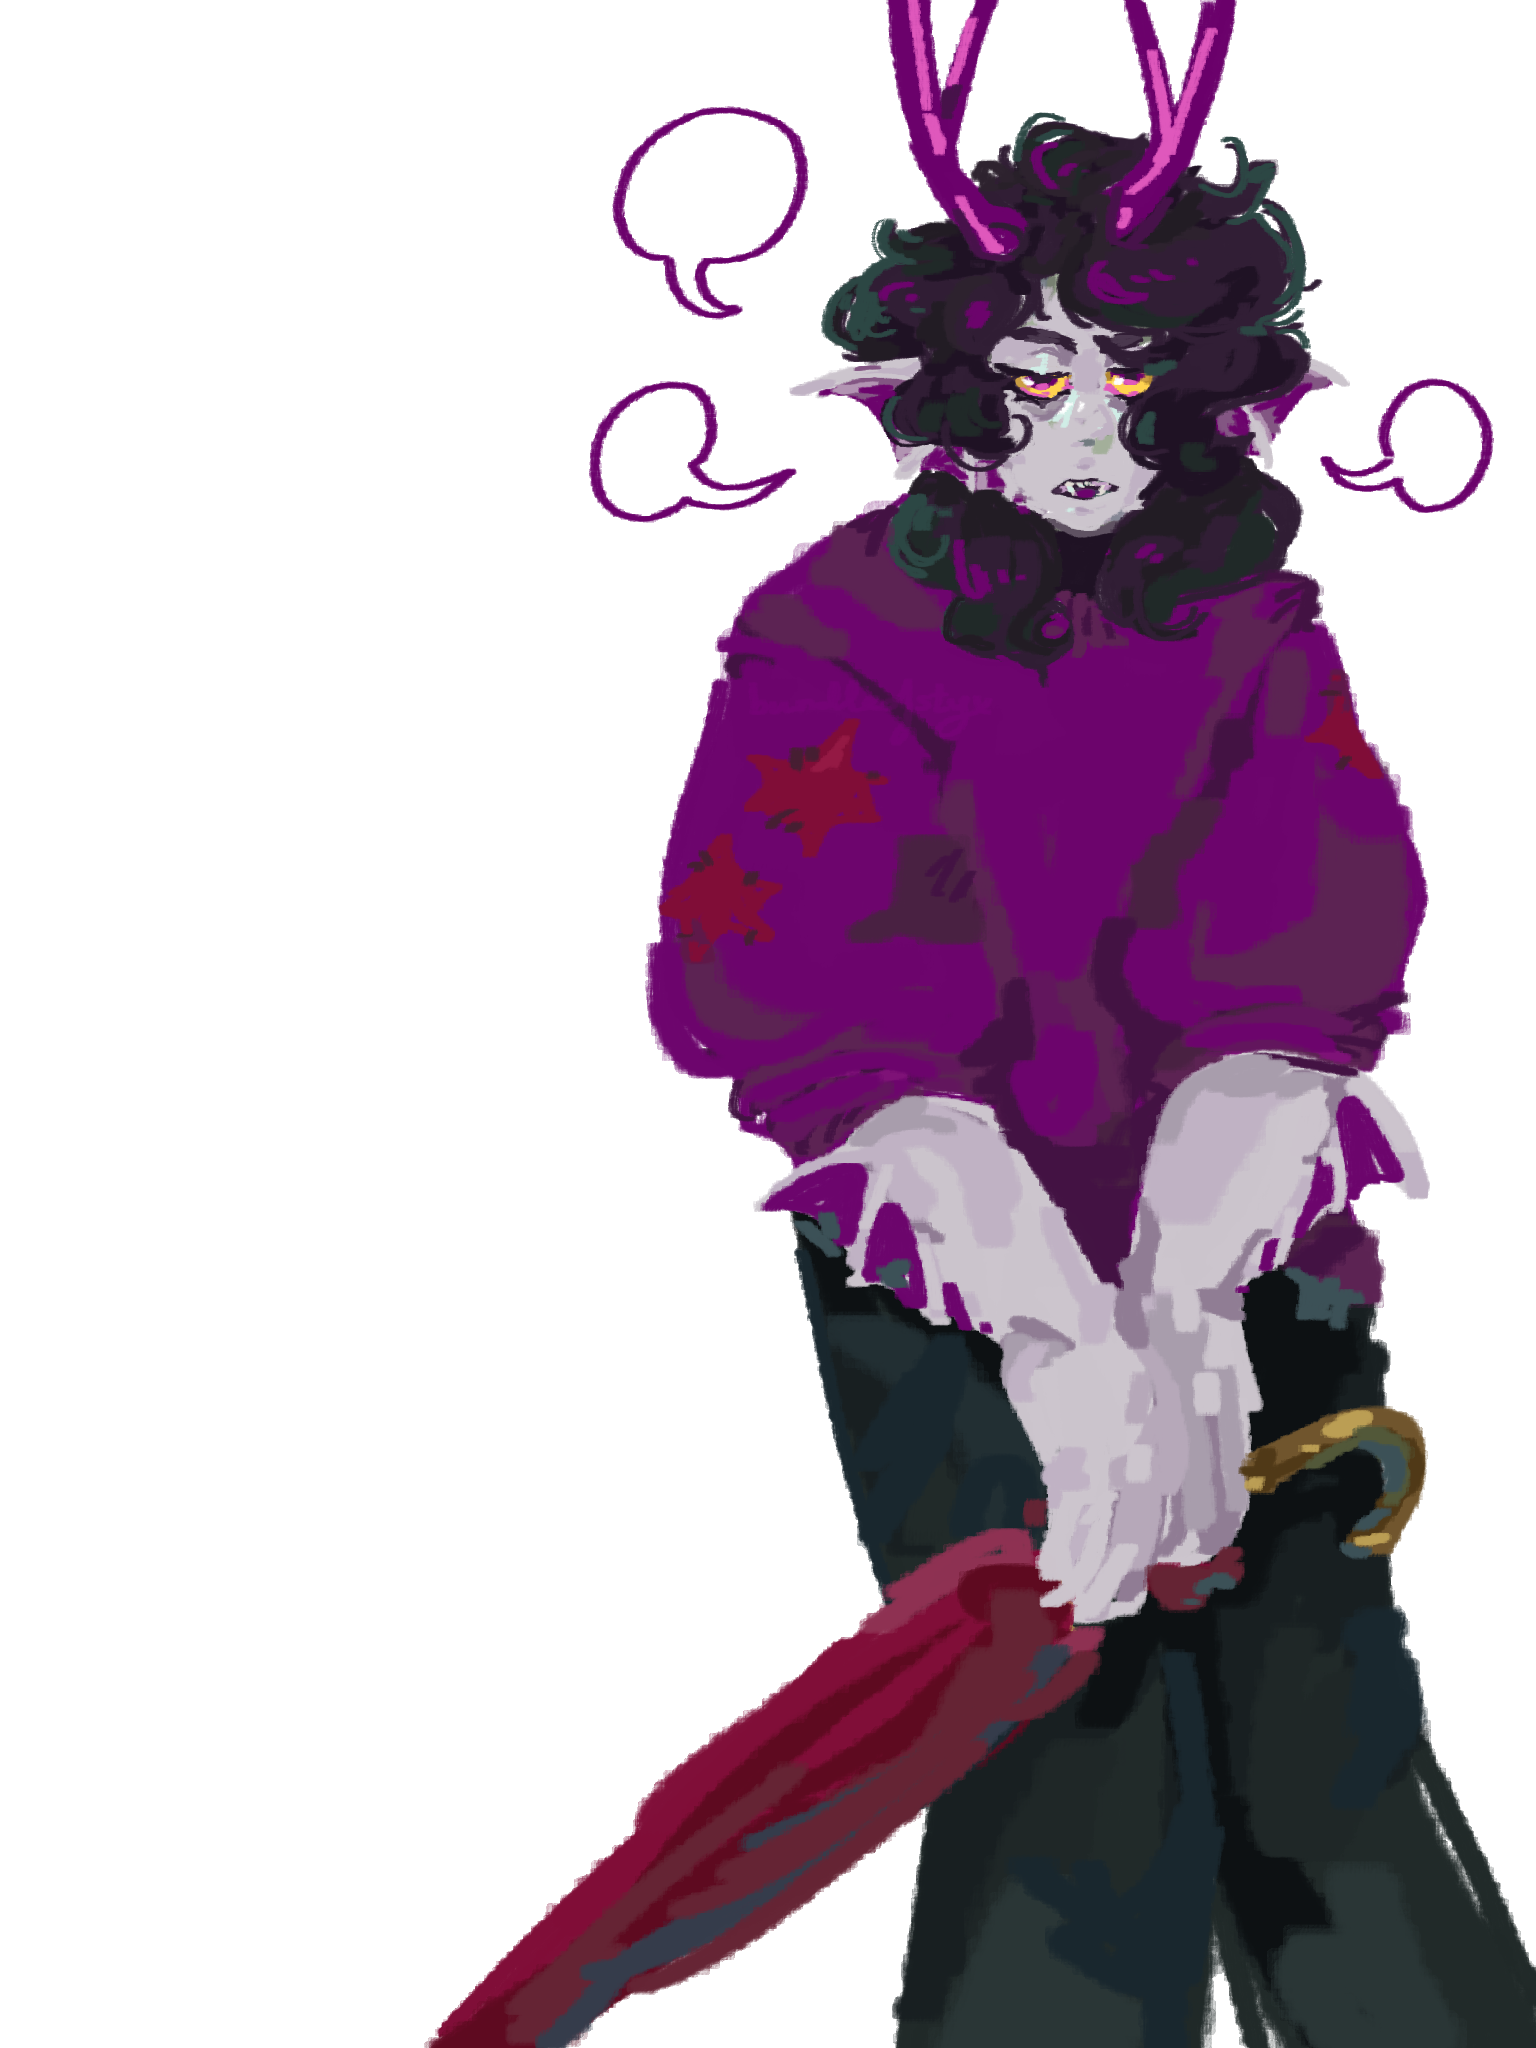 Phirom Vaarin standing looking annoyed. He's wearing a purple jumper, and is surrounded by empty speech bubbles.